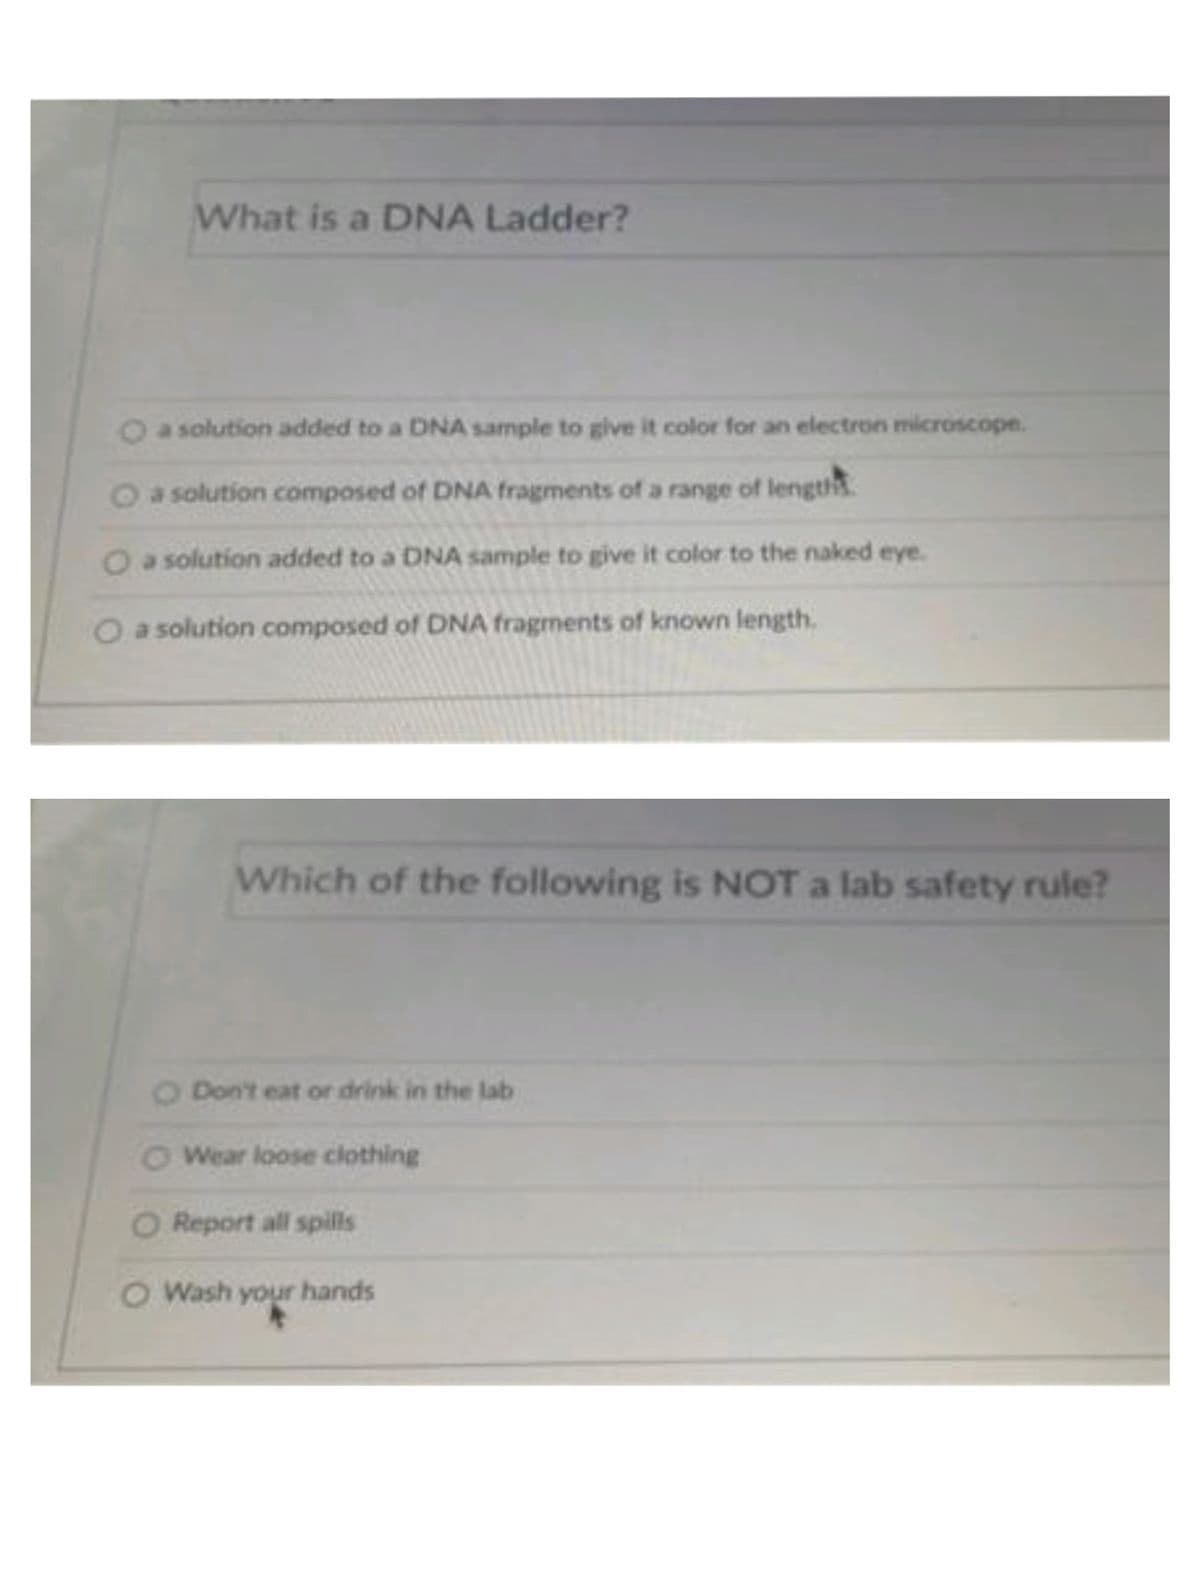 What is a DNA Ladder?
a solution added to a DNA sample to give it color for an electron microscope.
Oa solution composed of DNA fragments ofa range of length
O a solution added to a DNA sample to give it color to the naked eye.
Oa solution composed of DNA fragments of known length.
Which of the following is NOT a lab safety rule?
O Don't eat or drink in the lab
O Wear loose clothing
O Report all spills
O Wash your hands
